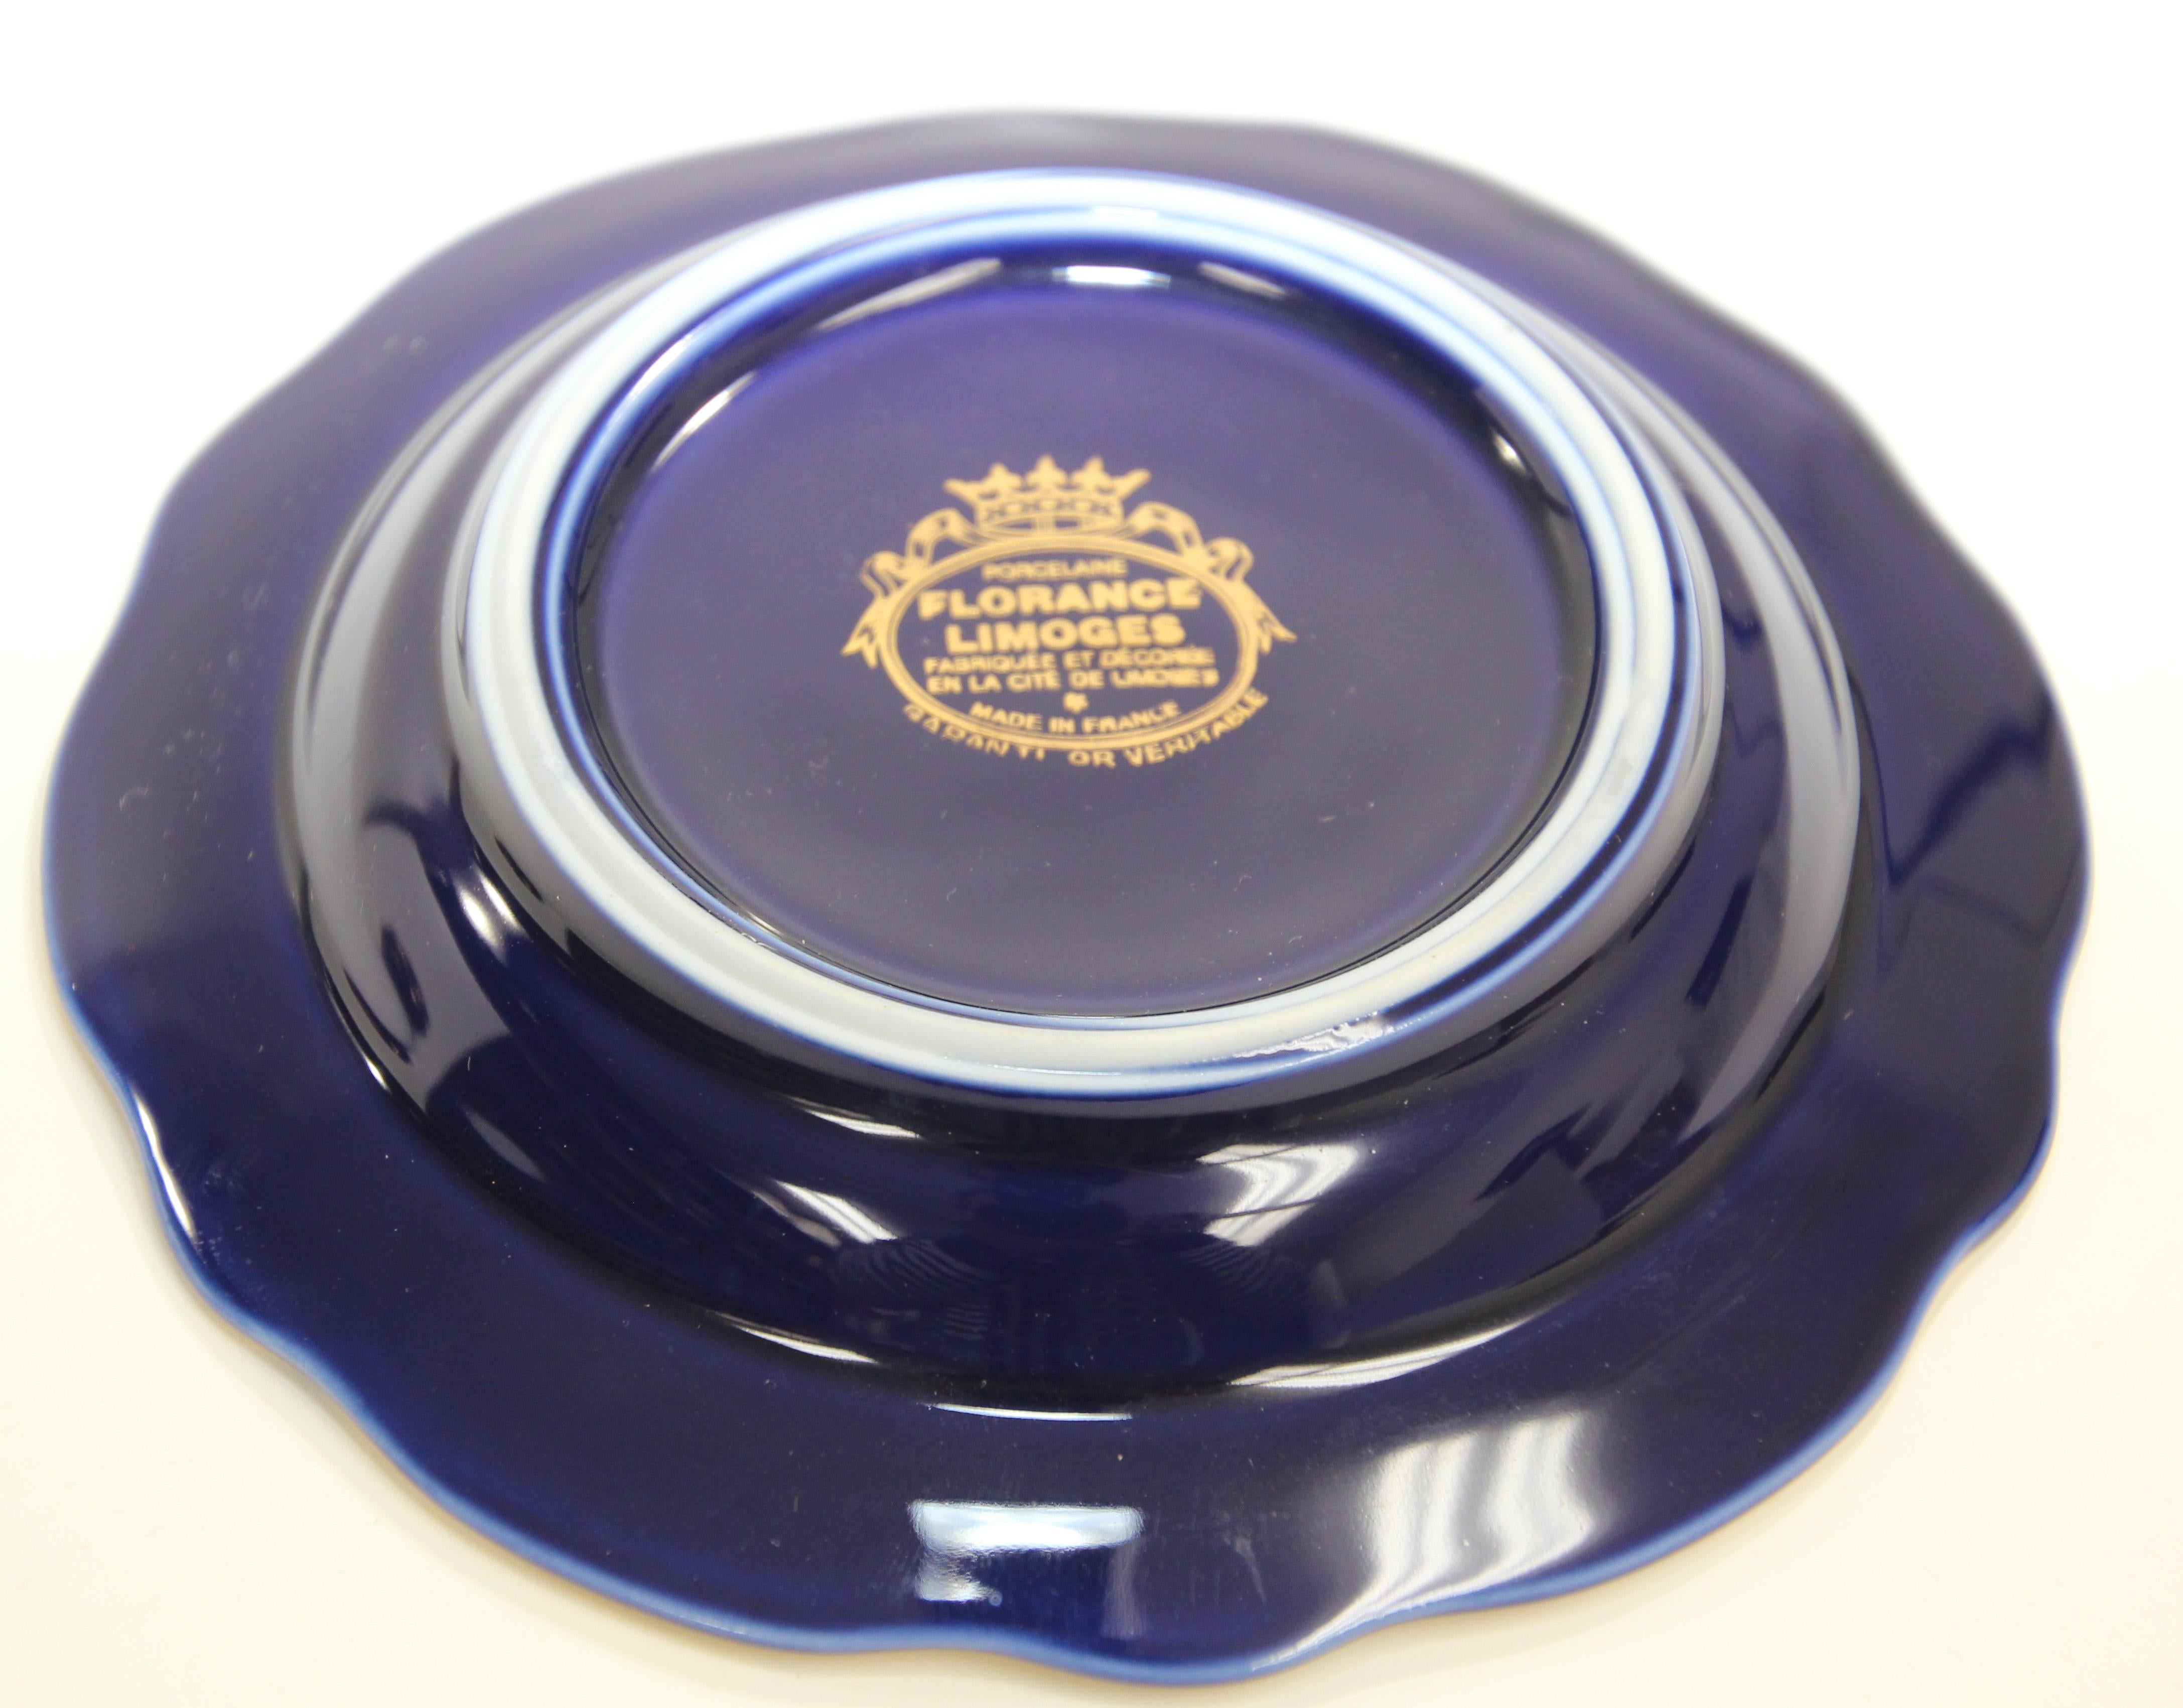 French Hand-Painted Cobalt Blue and Gold Limoges France Porcelain Ashtray